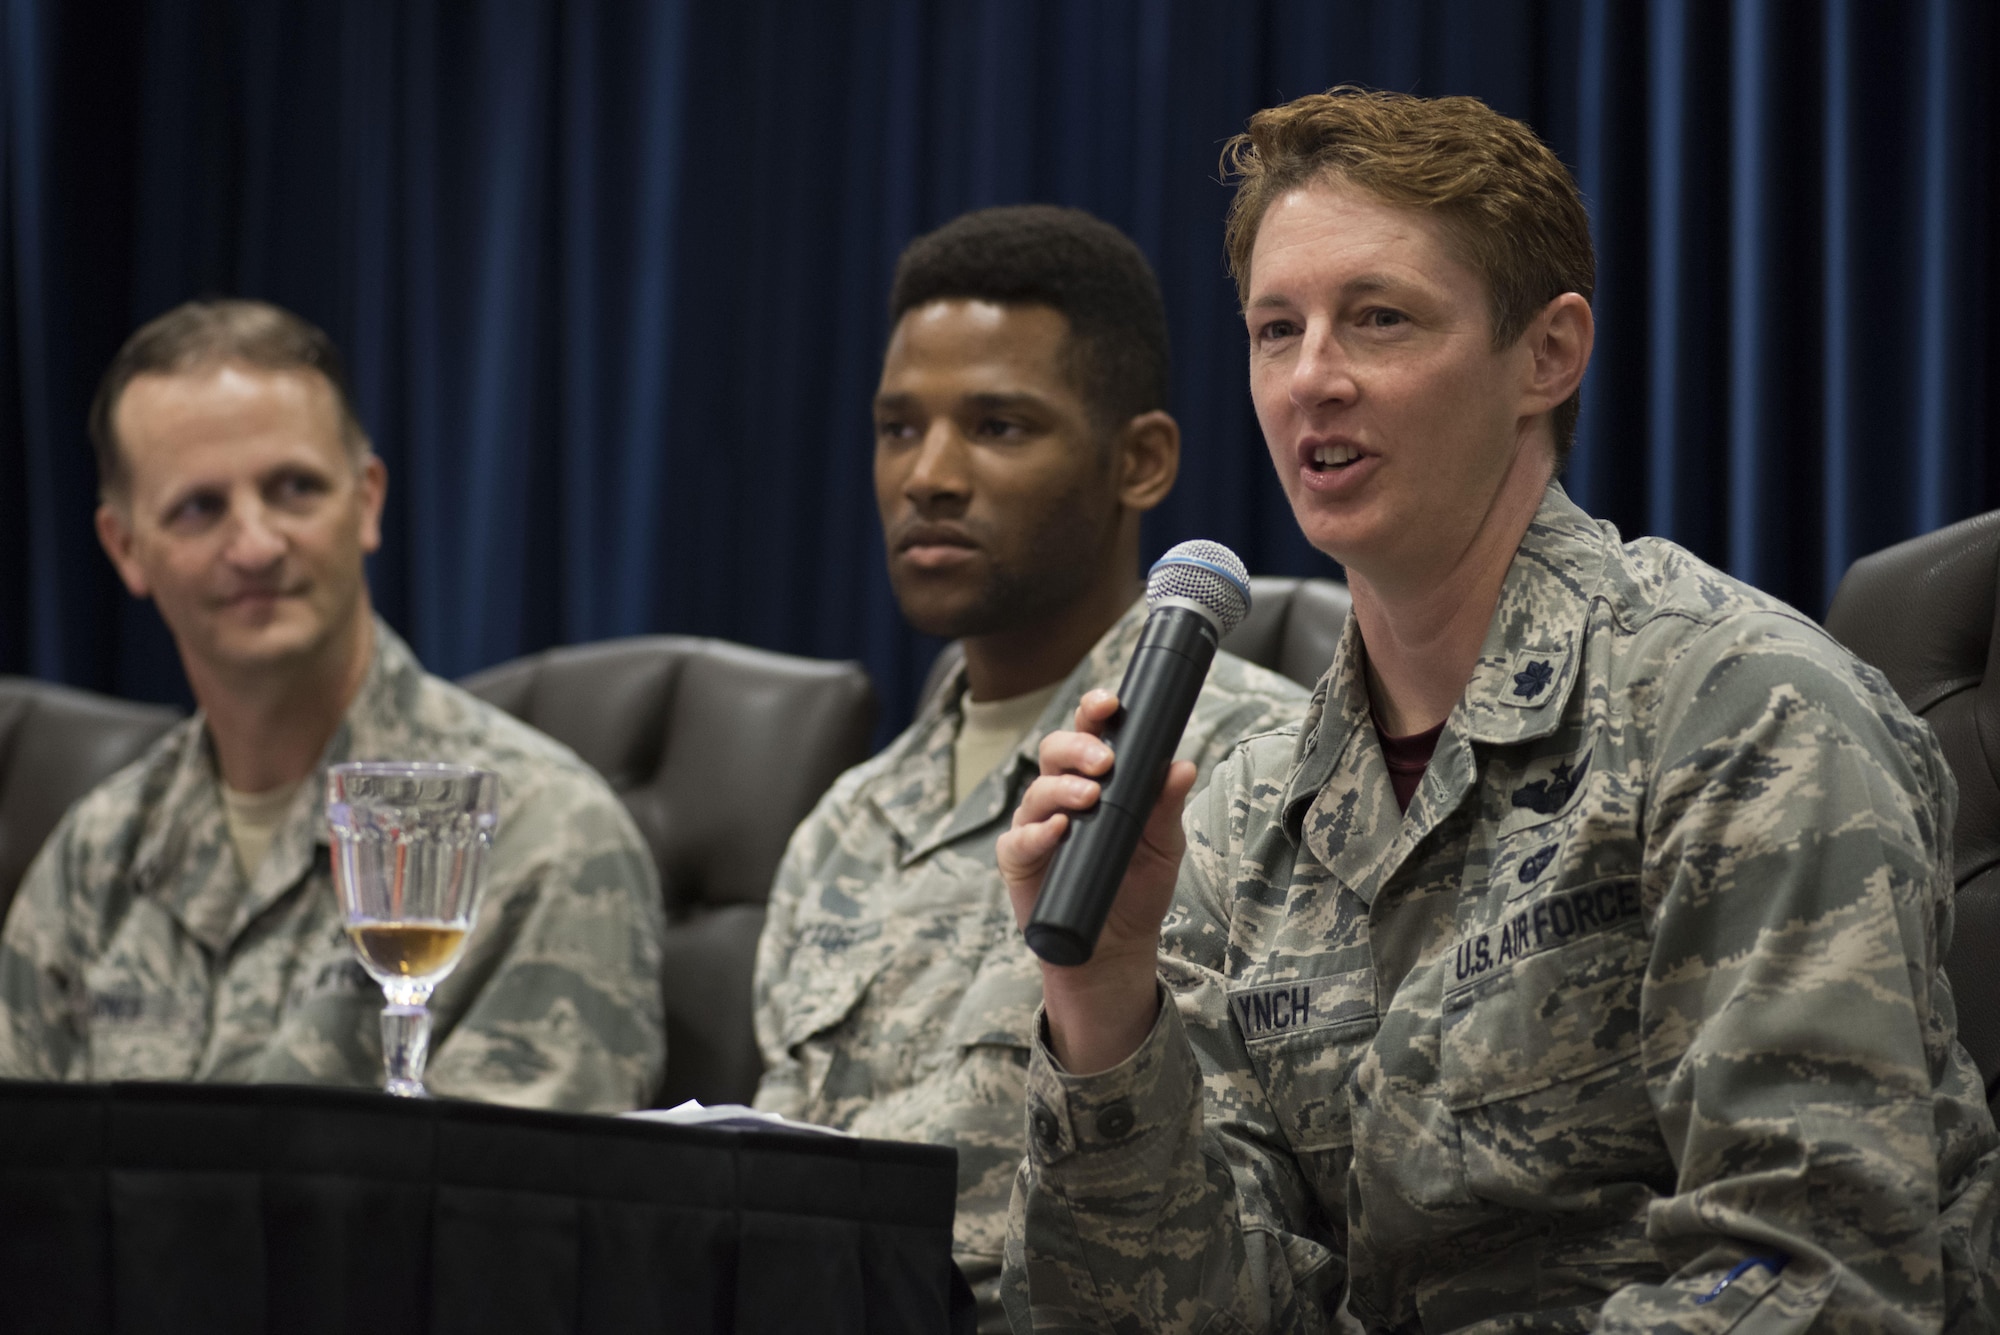 U.S. Air Force Lt. Col. Sarah Lynch, 39th Air Base Wing safety executive, shares her experiences as a lesbian service member as part of LGBT Pride Month June 16, 2017, at Incirlik Air Base, Turkey. Lynch also spoke on her time in the Air Force under the military’s Don’t Ask, Don’t Tell policy. (U.S. Air Force photo by Airman 1st Class Kristan Campbell) 